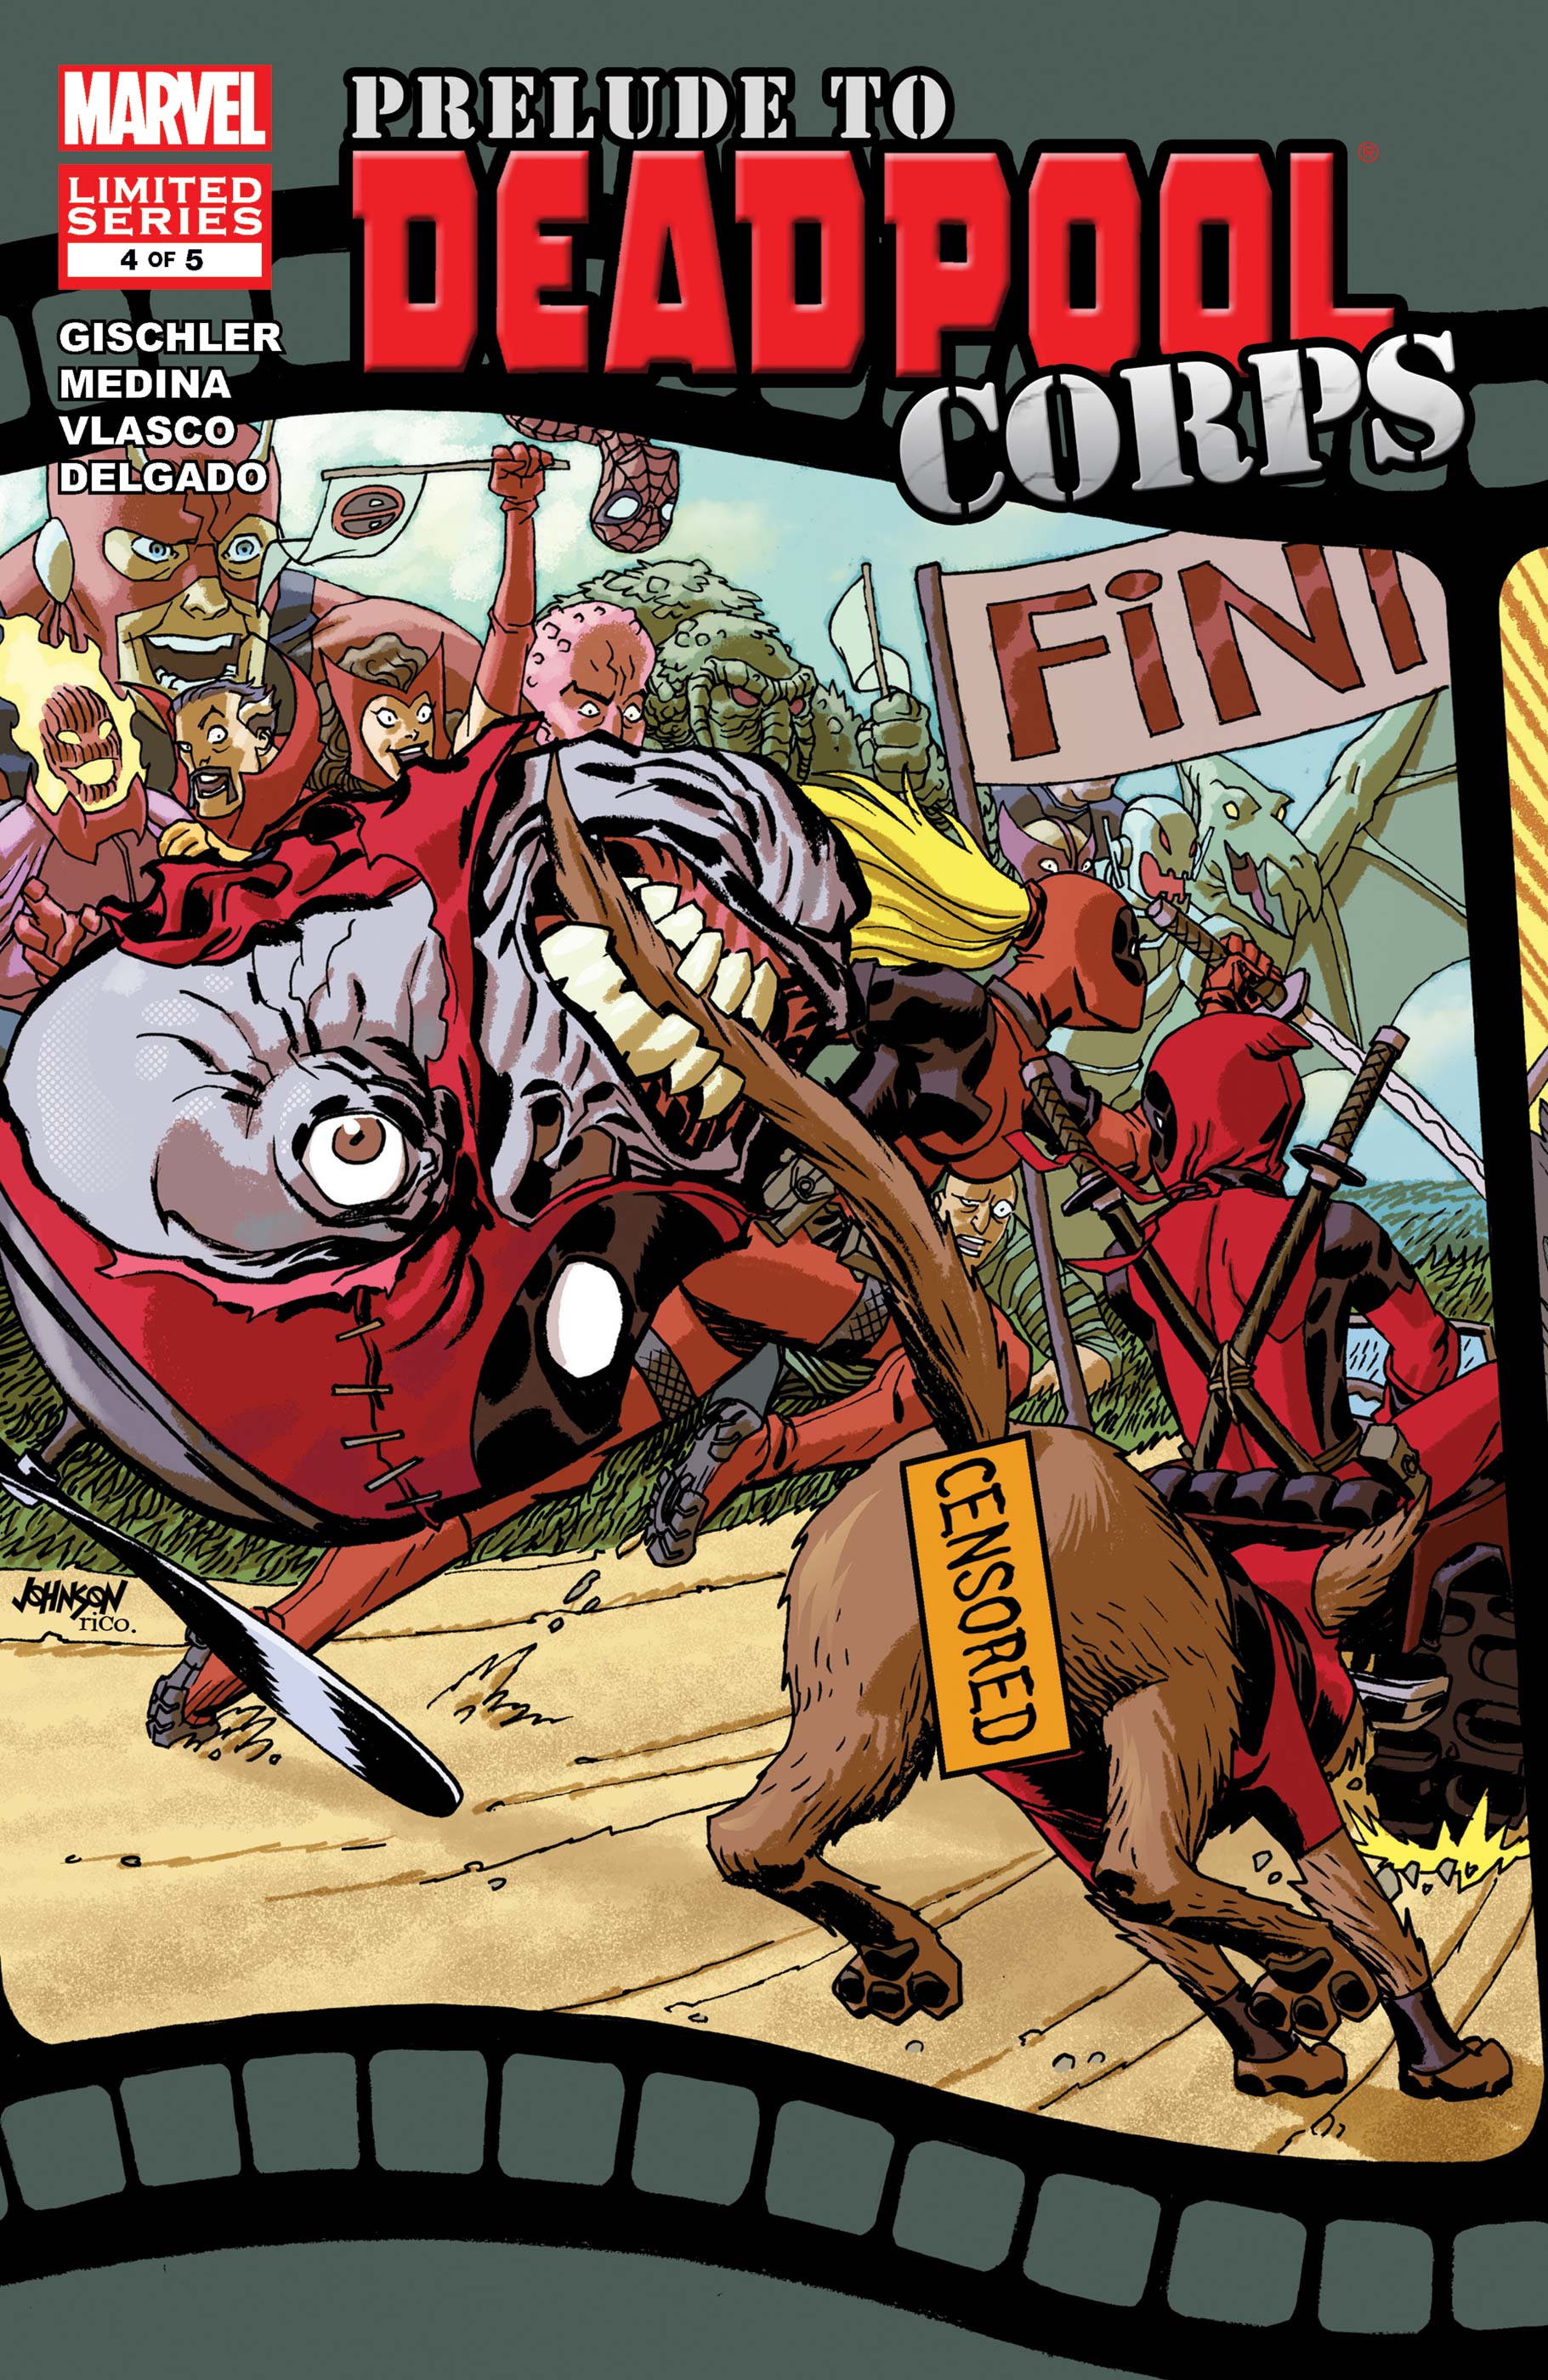 Prelude to Deadpool Corps (2010) #4